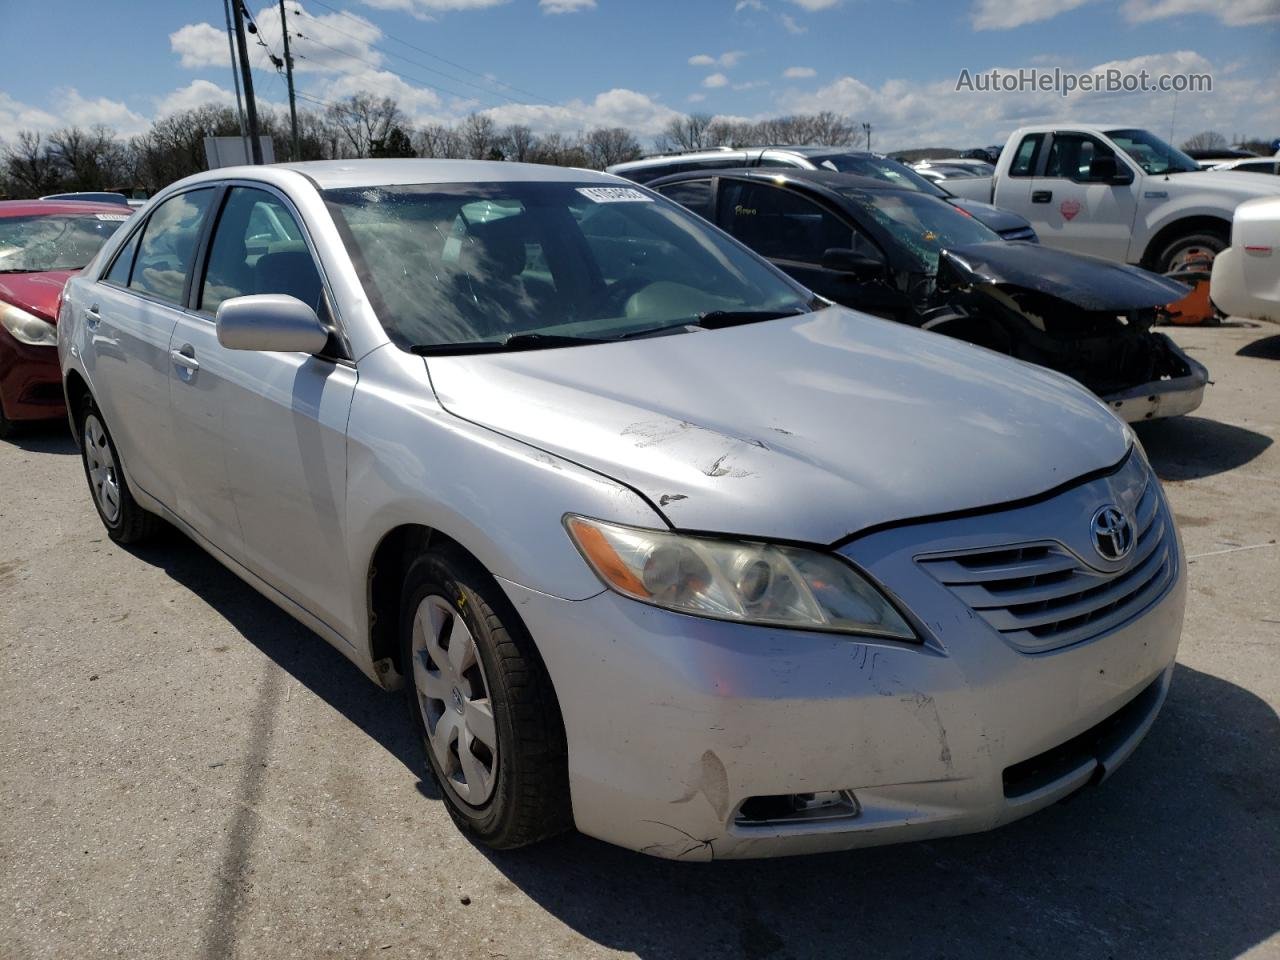 2009 Toyota Camry Base Silver vin: 4T4BE46K99R078309